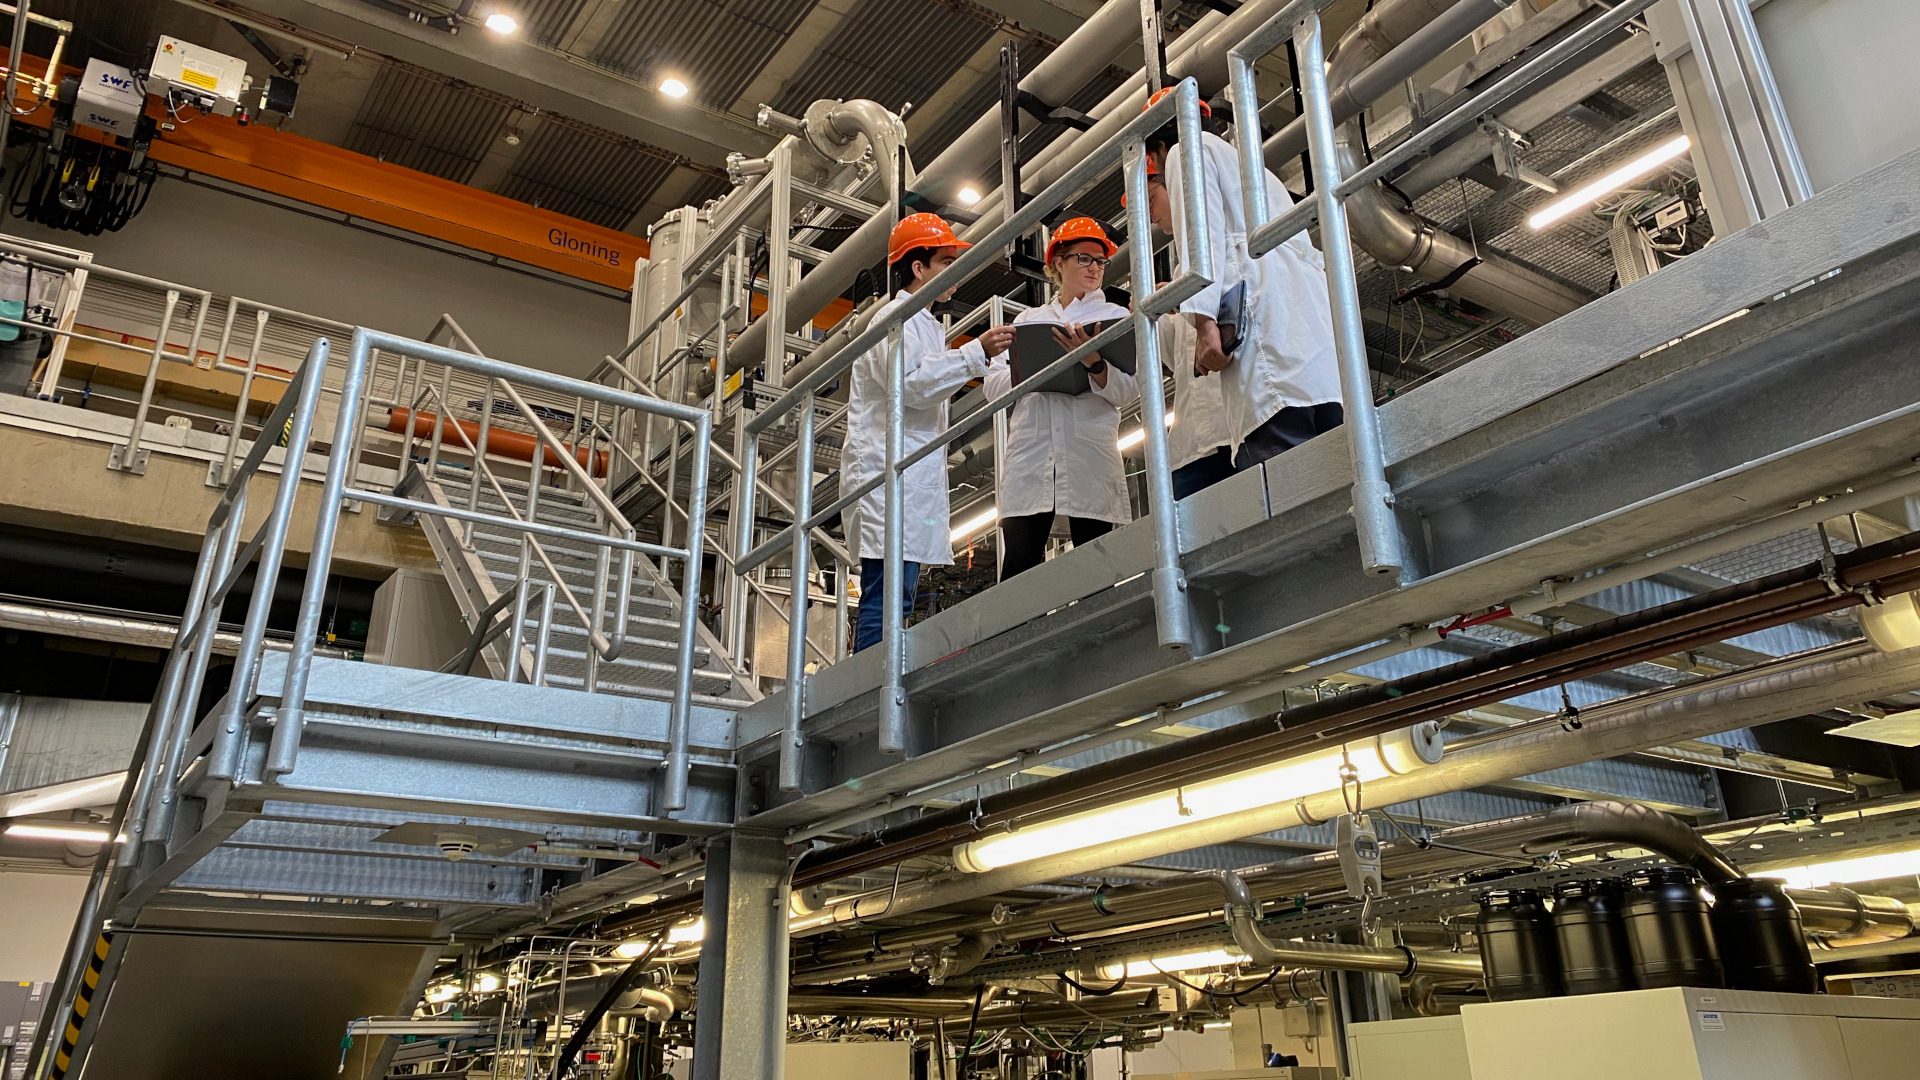 View from the lowest floor to an upper grid level in the multi-storey laboratory of the nanoparticle synthesis facilities. Three scientists in lab coats and helmets are having a discussion.